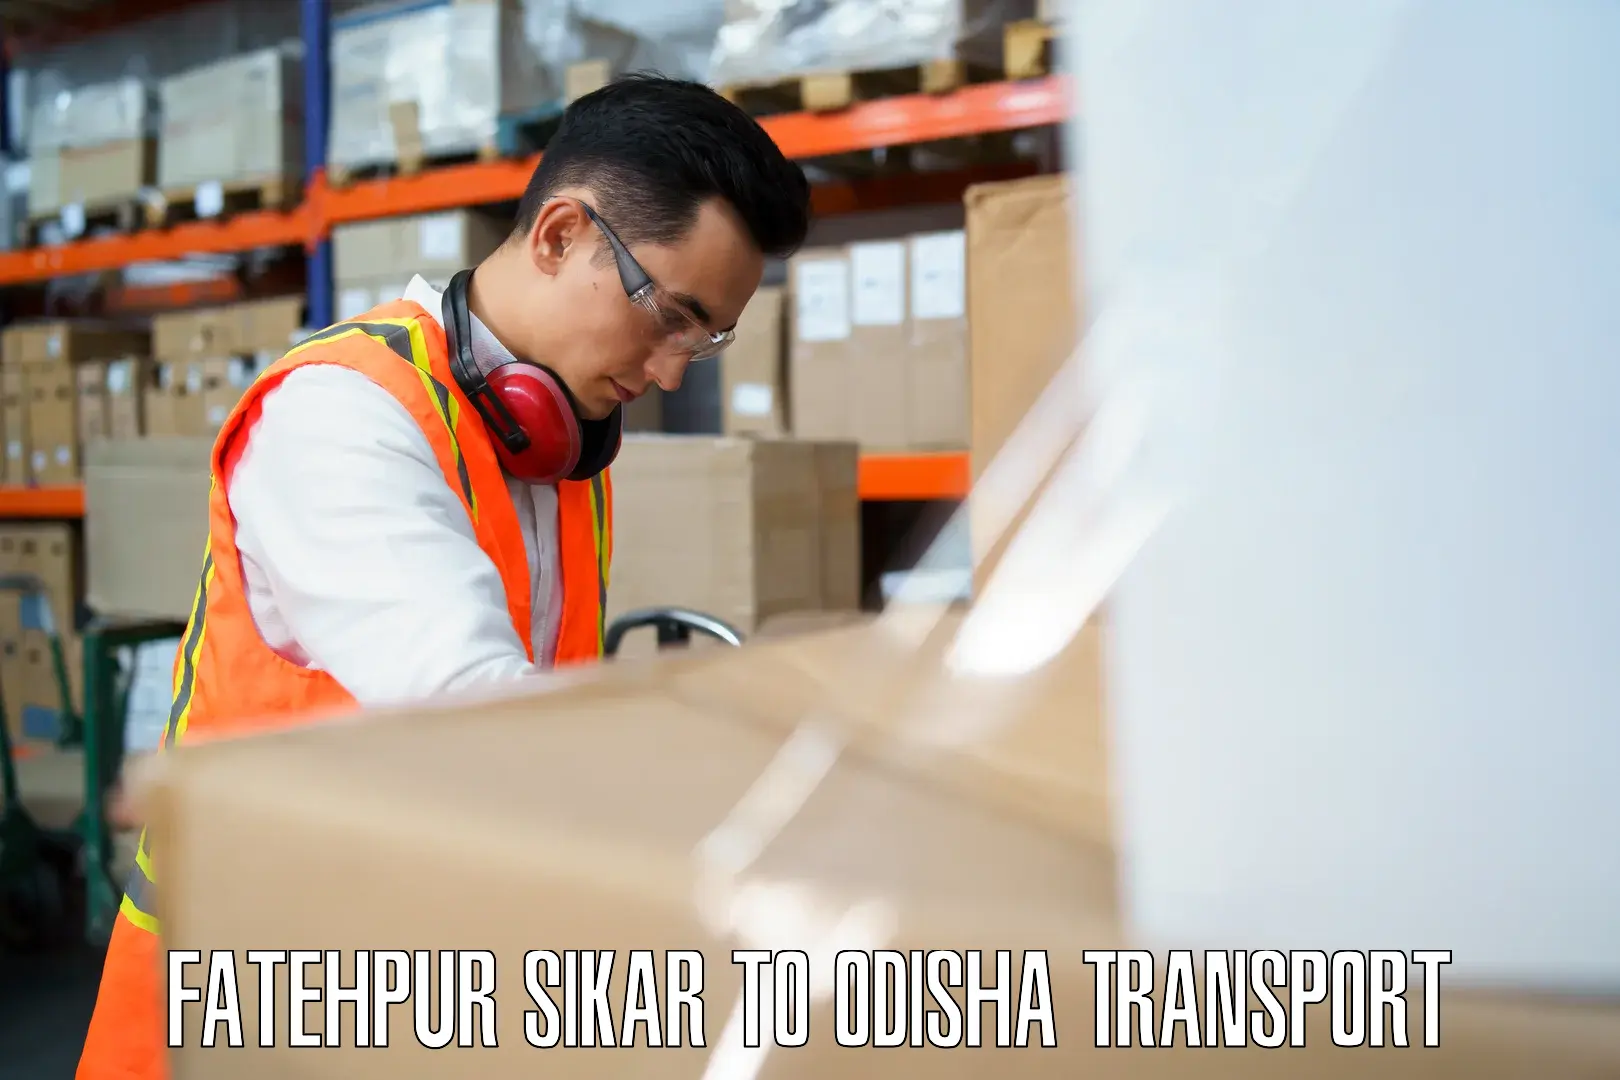 Container transport service Fatehpur Sikar to Betnoti